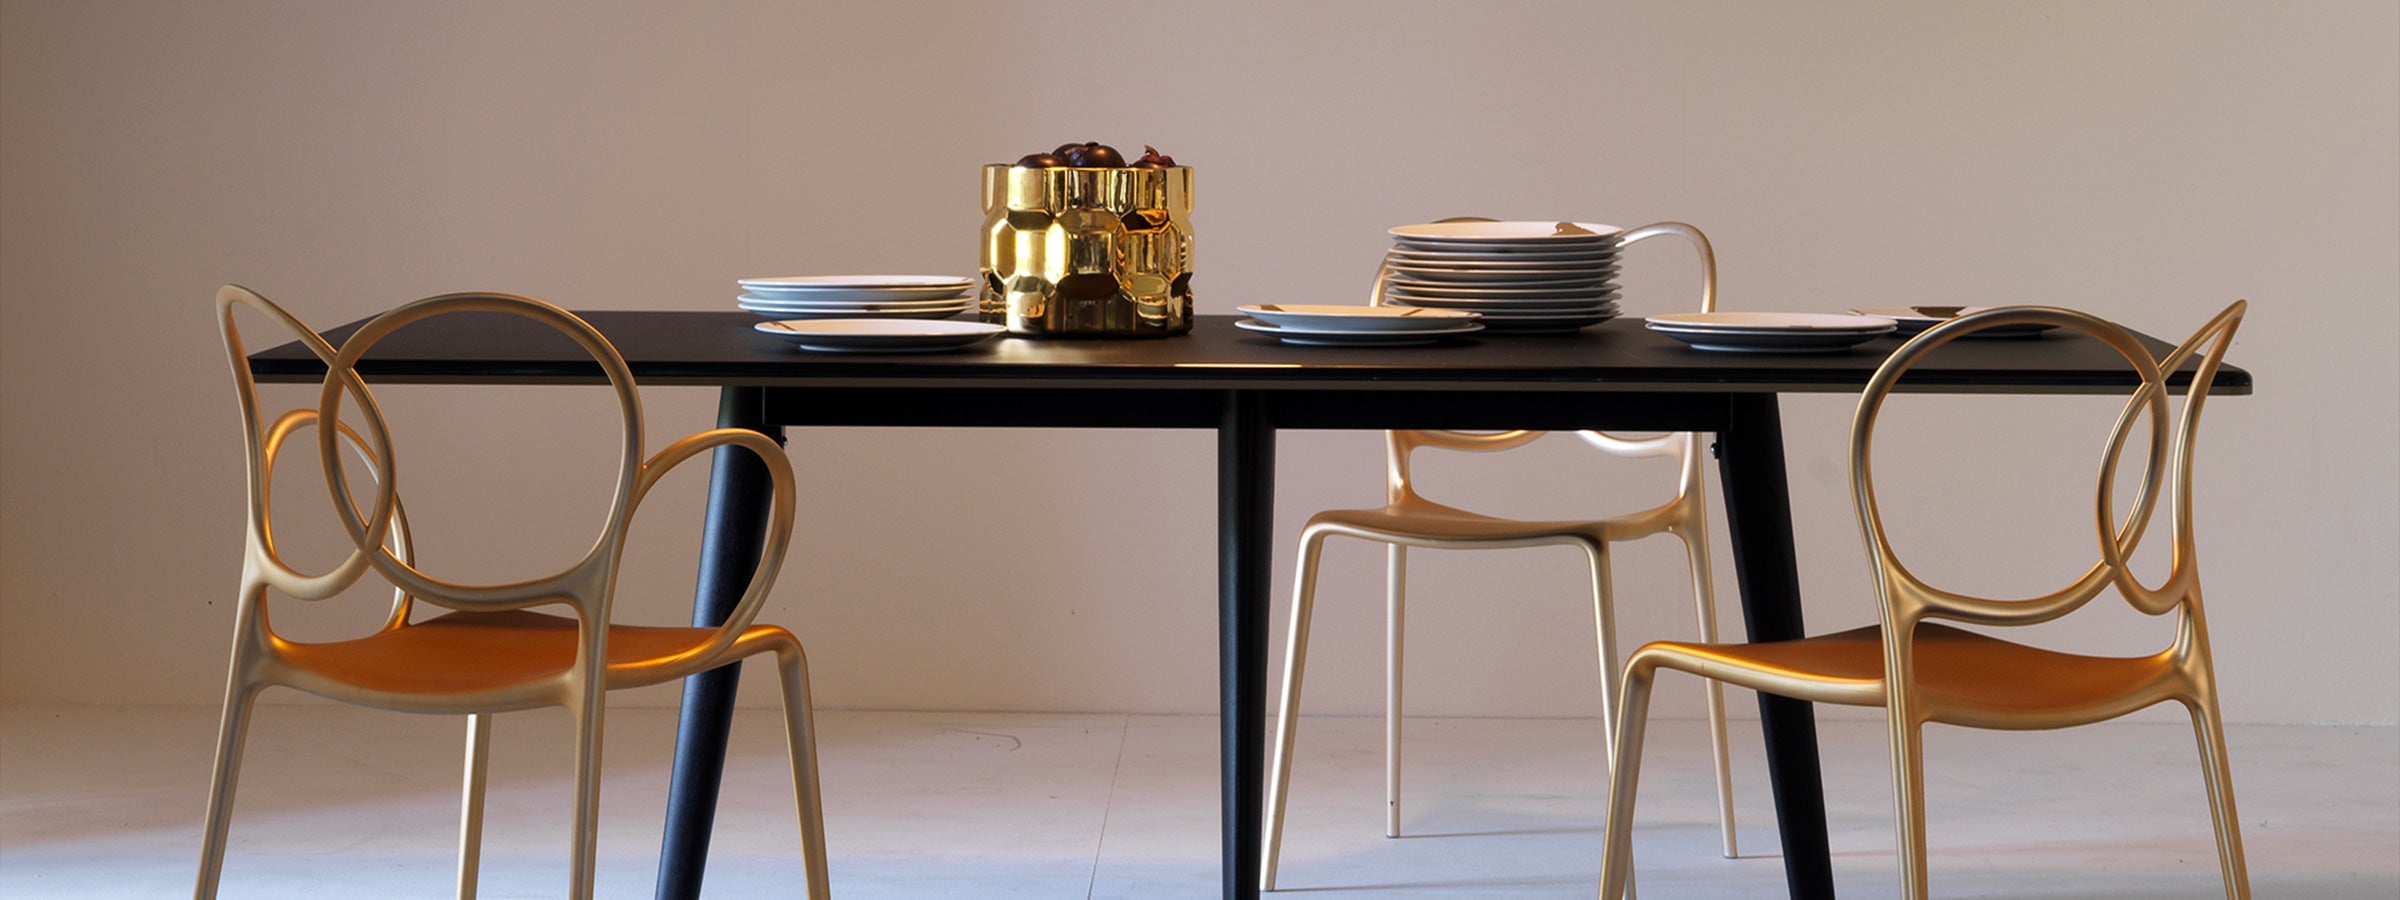 SISSI Collection by Ludovica + Roberto Palomba for Driade - Design Italy